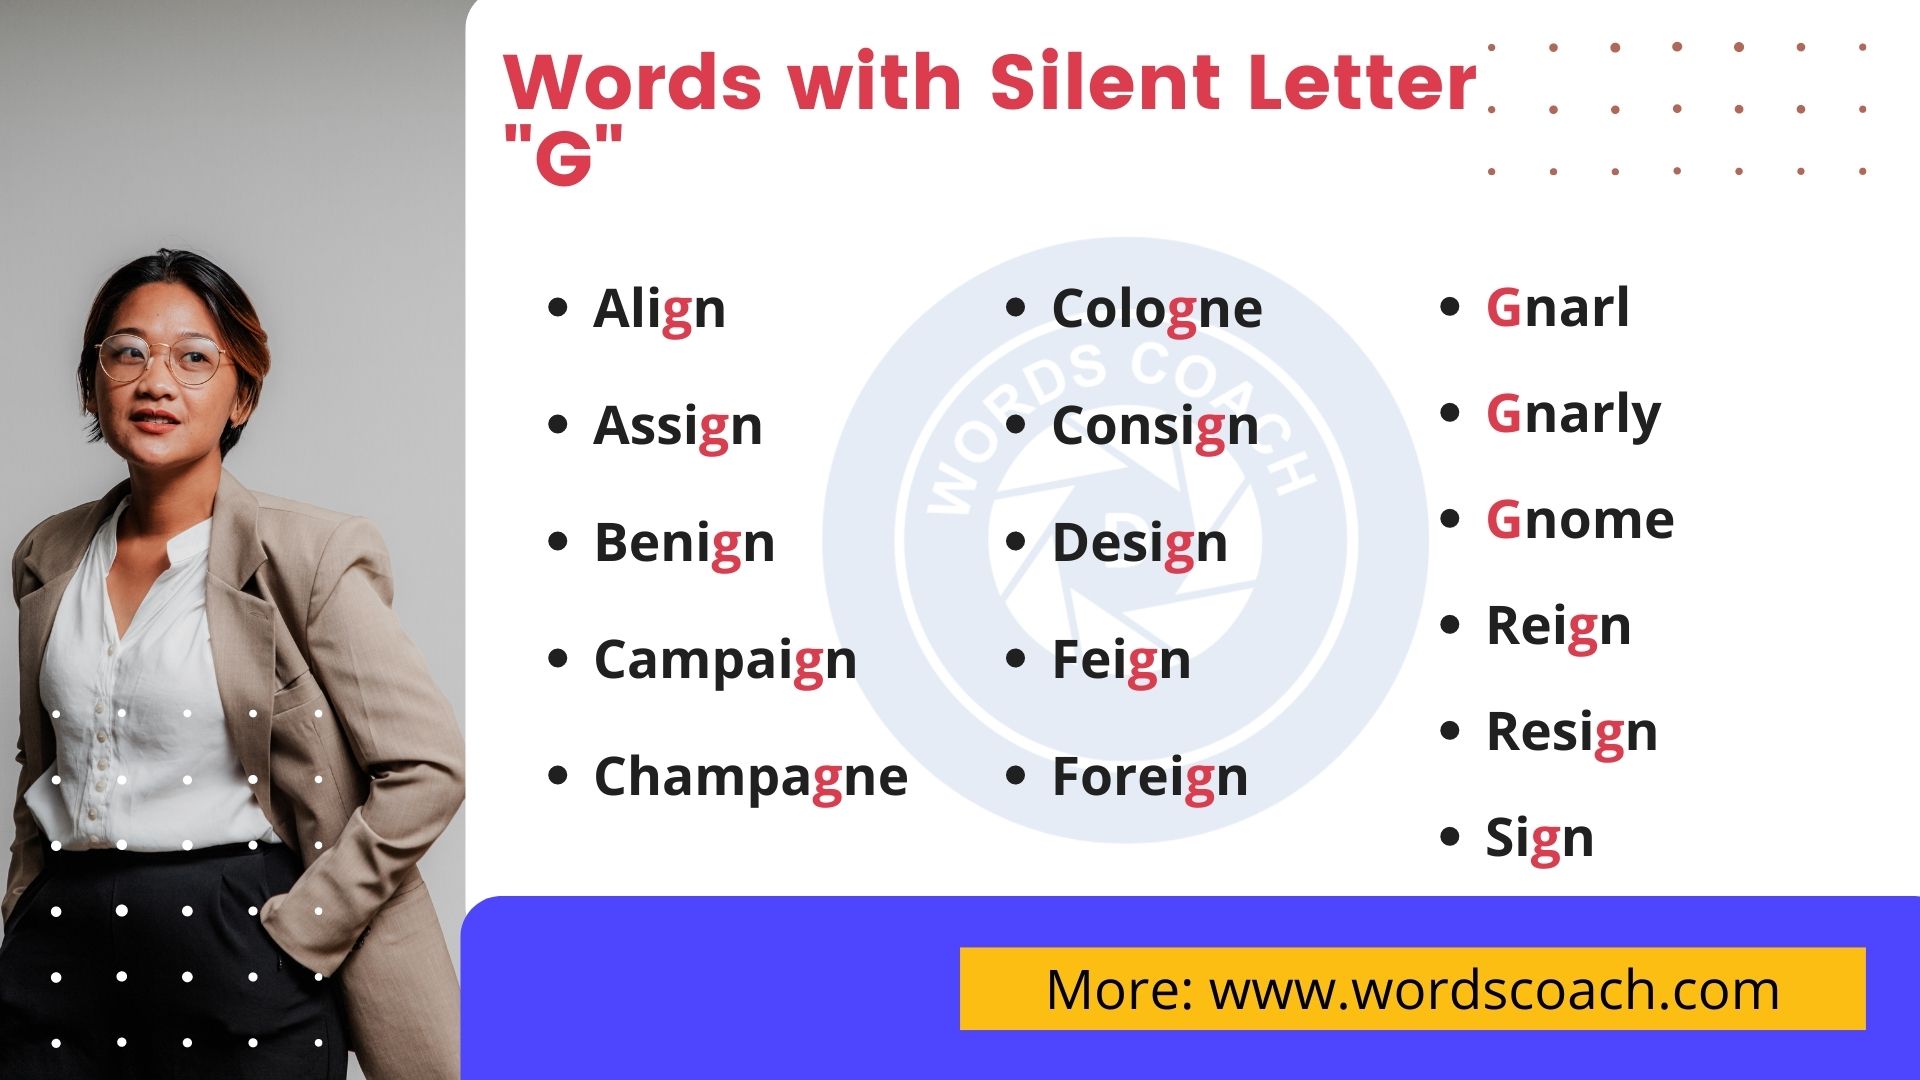 Words with Silent Letter G - wordscoach.com